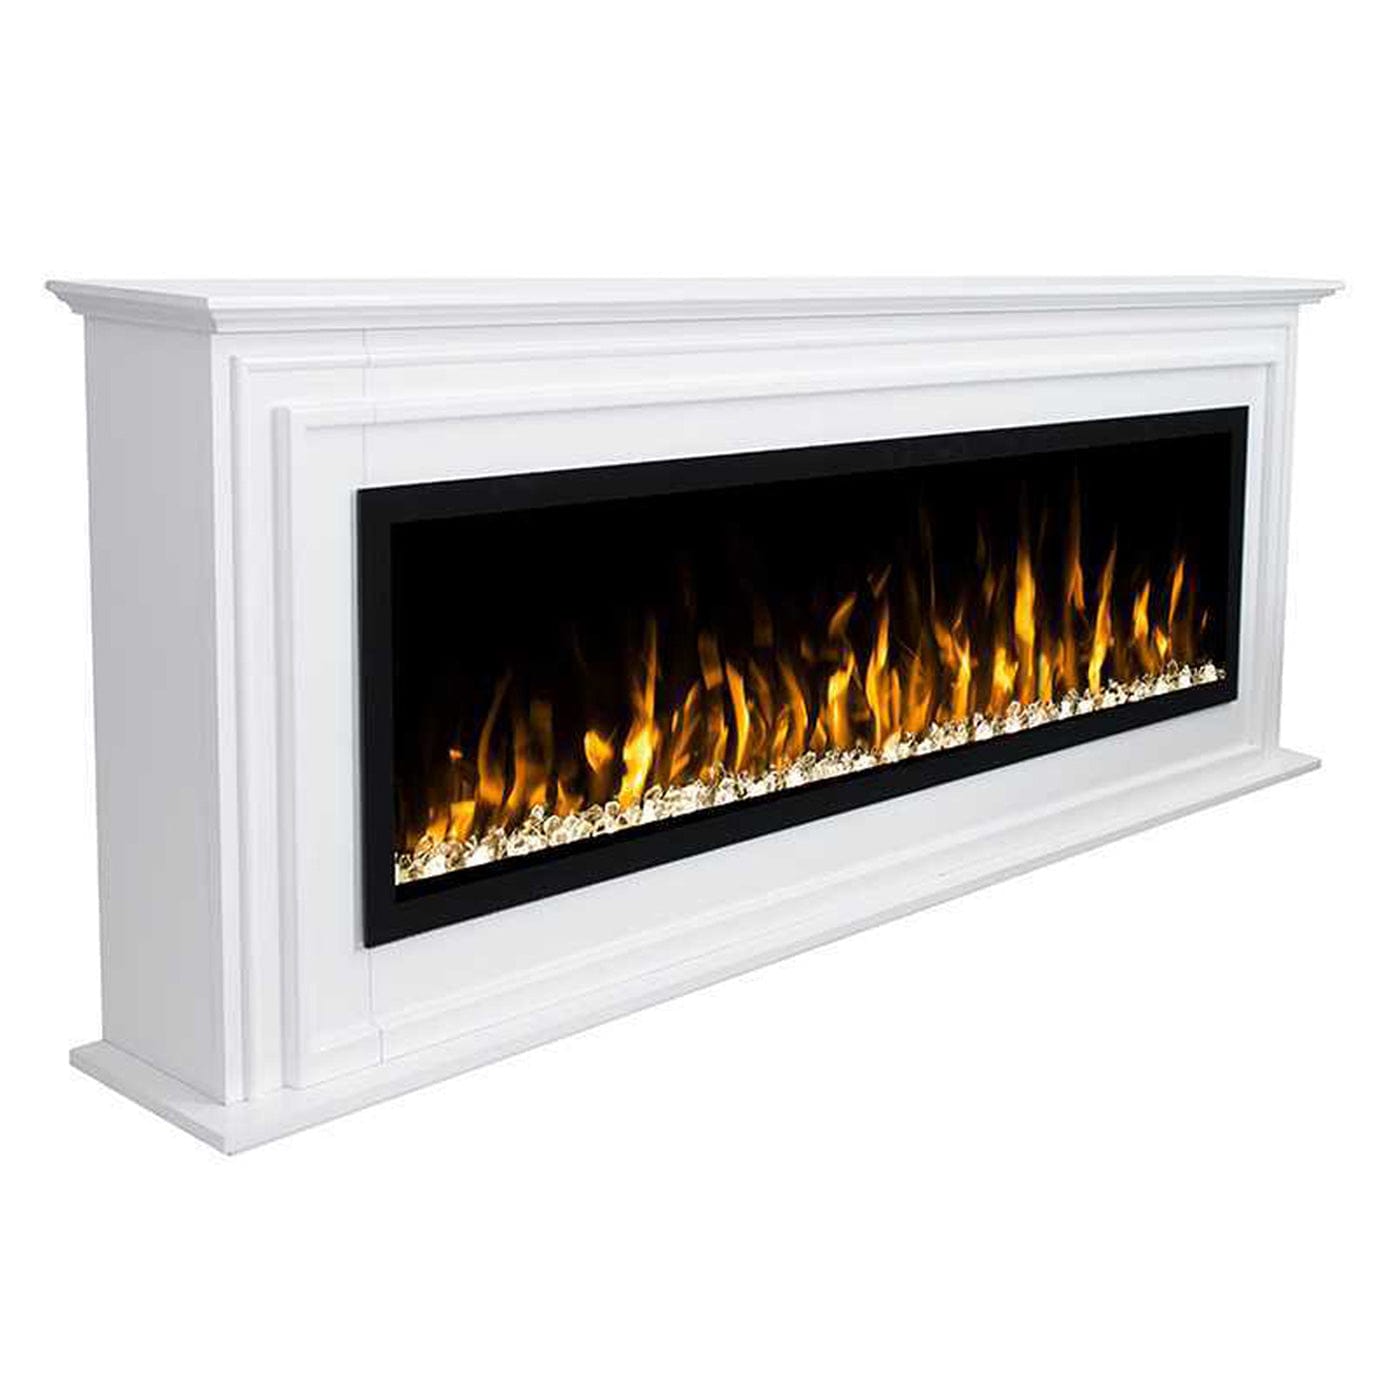 Touchstone Encase Surround Mantel with Sideline Elite 50 Smart Electric Fireplace